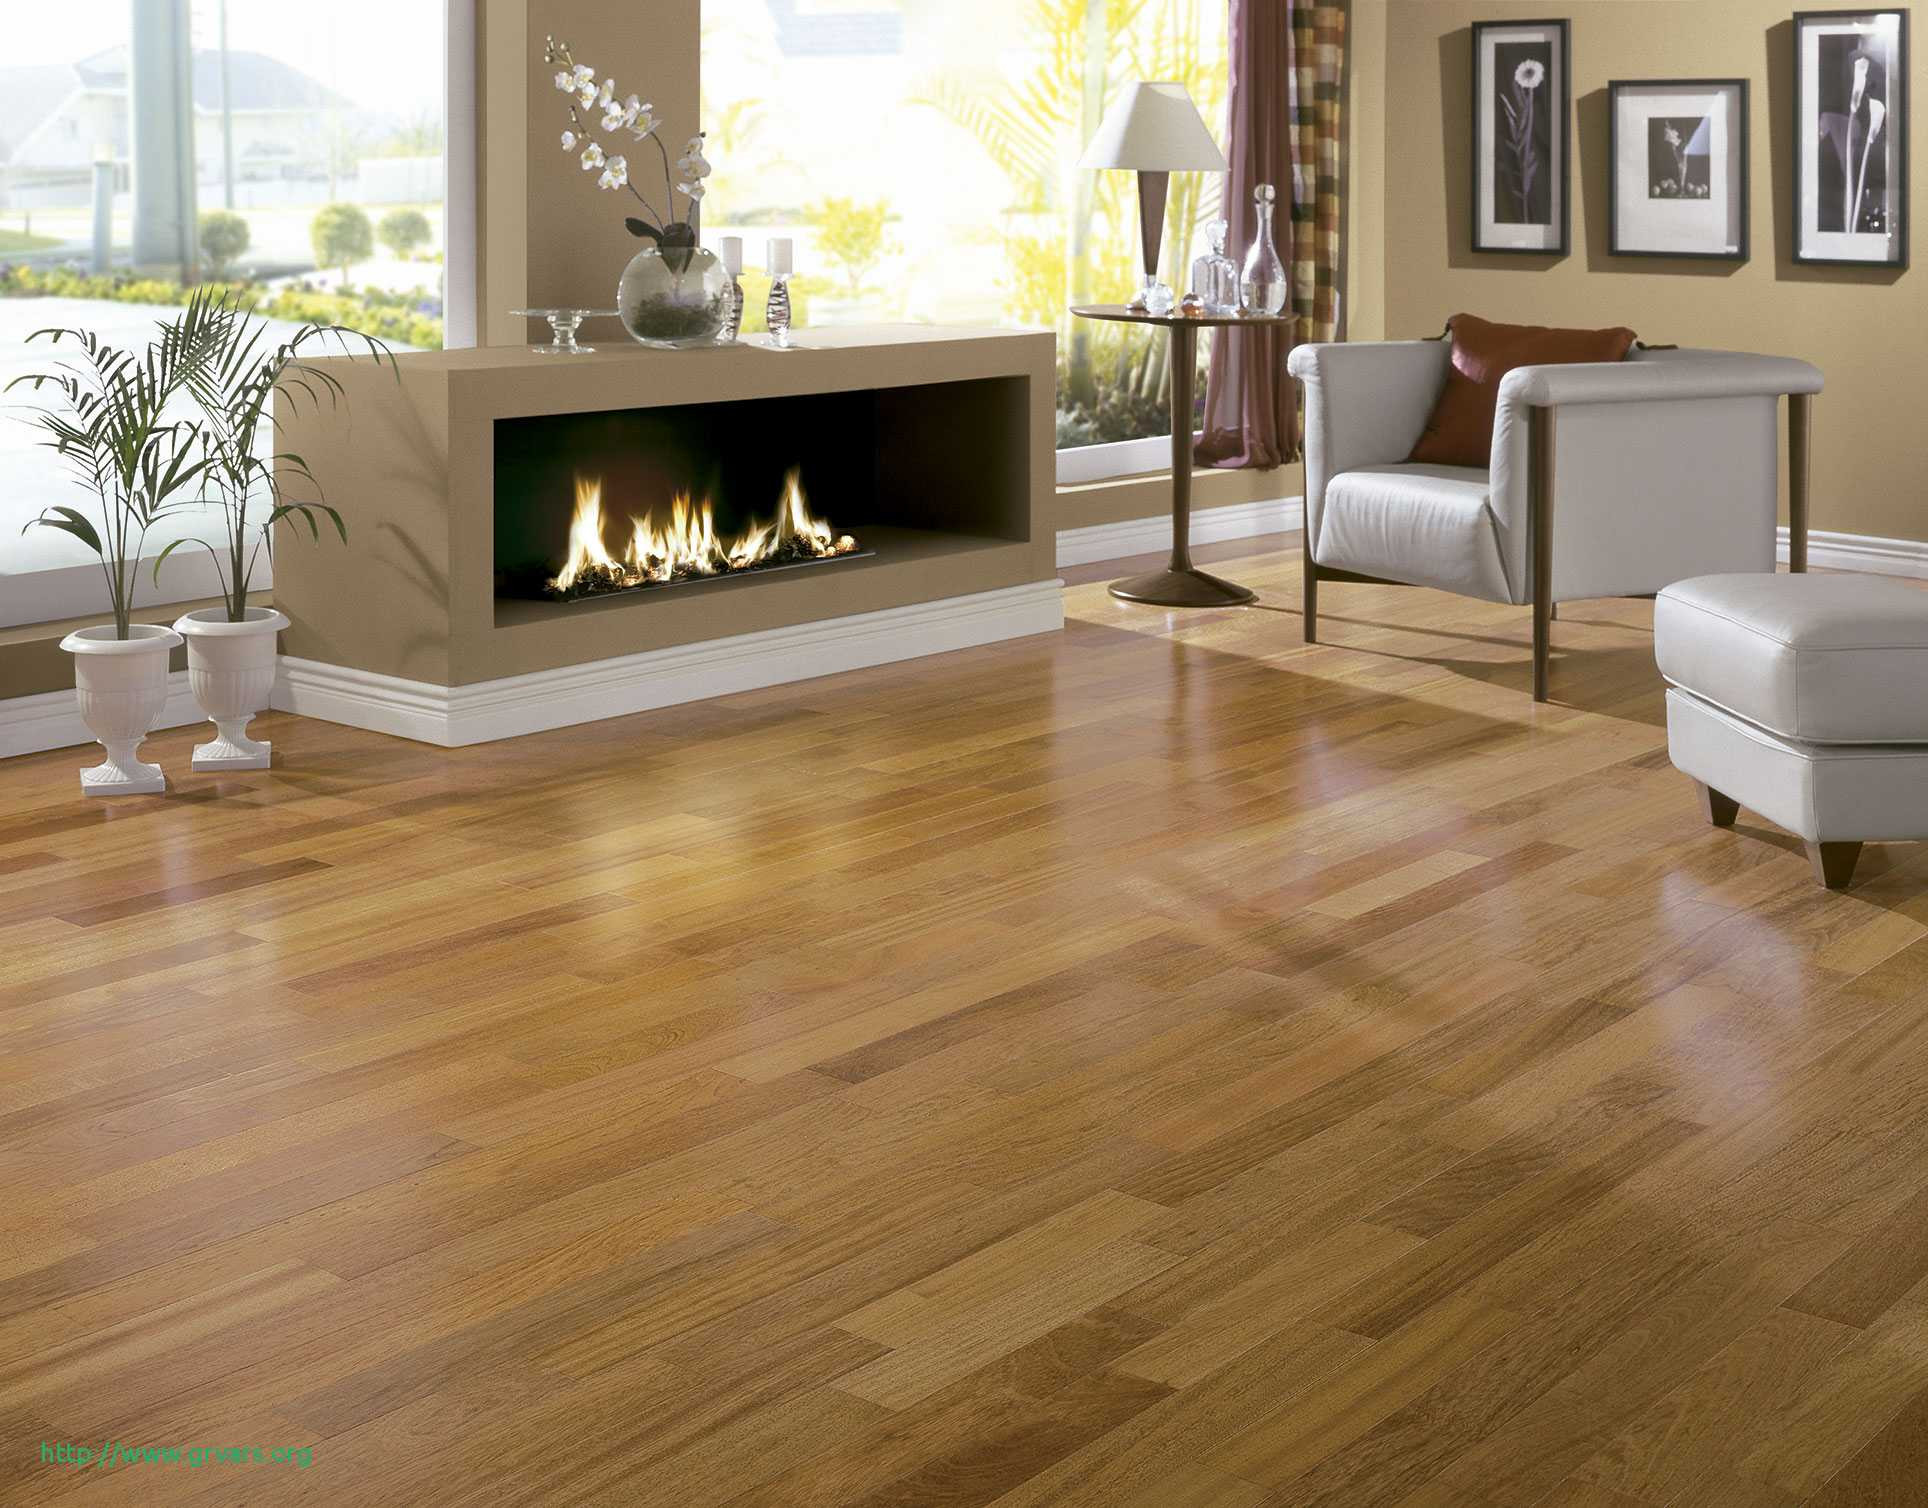 27 Ideal Dustless Hardwood Floor Refinishing St Louis 2024 free download dustless hardwood floor refinishing st louis of 23 nouveau how to clean paint from hardwood floors ideas blog throughout full size of bedroom cute discount hardwood flooring 6 brazilian cher